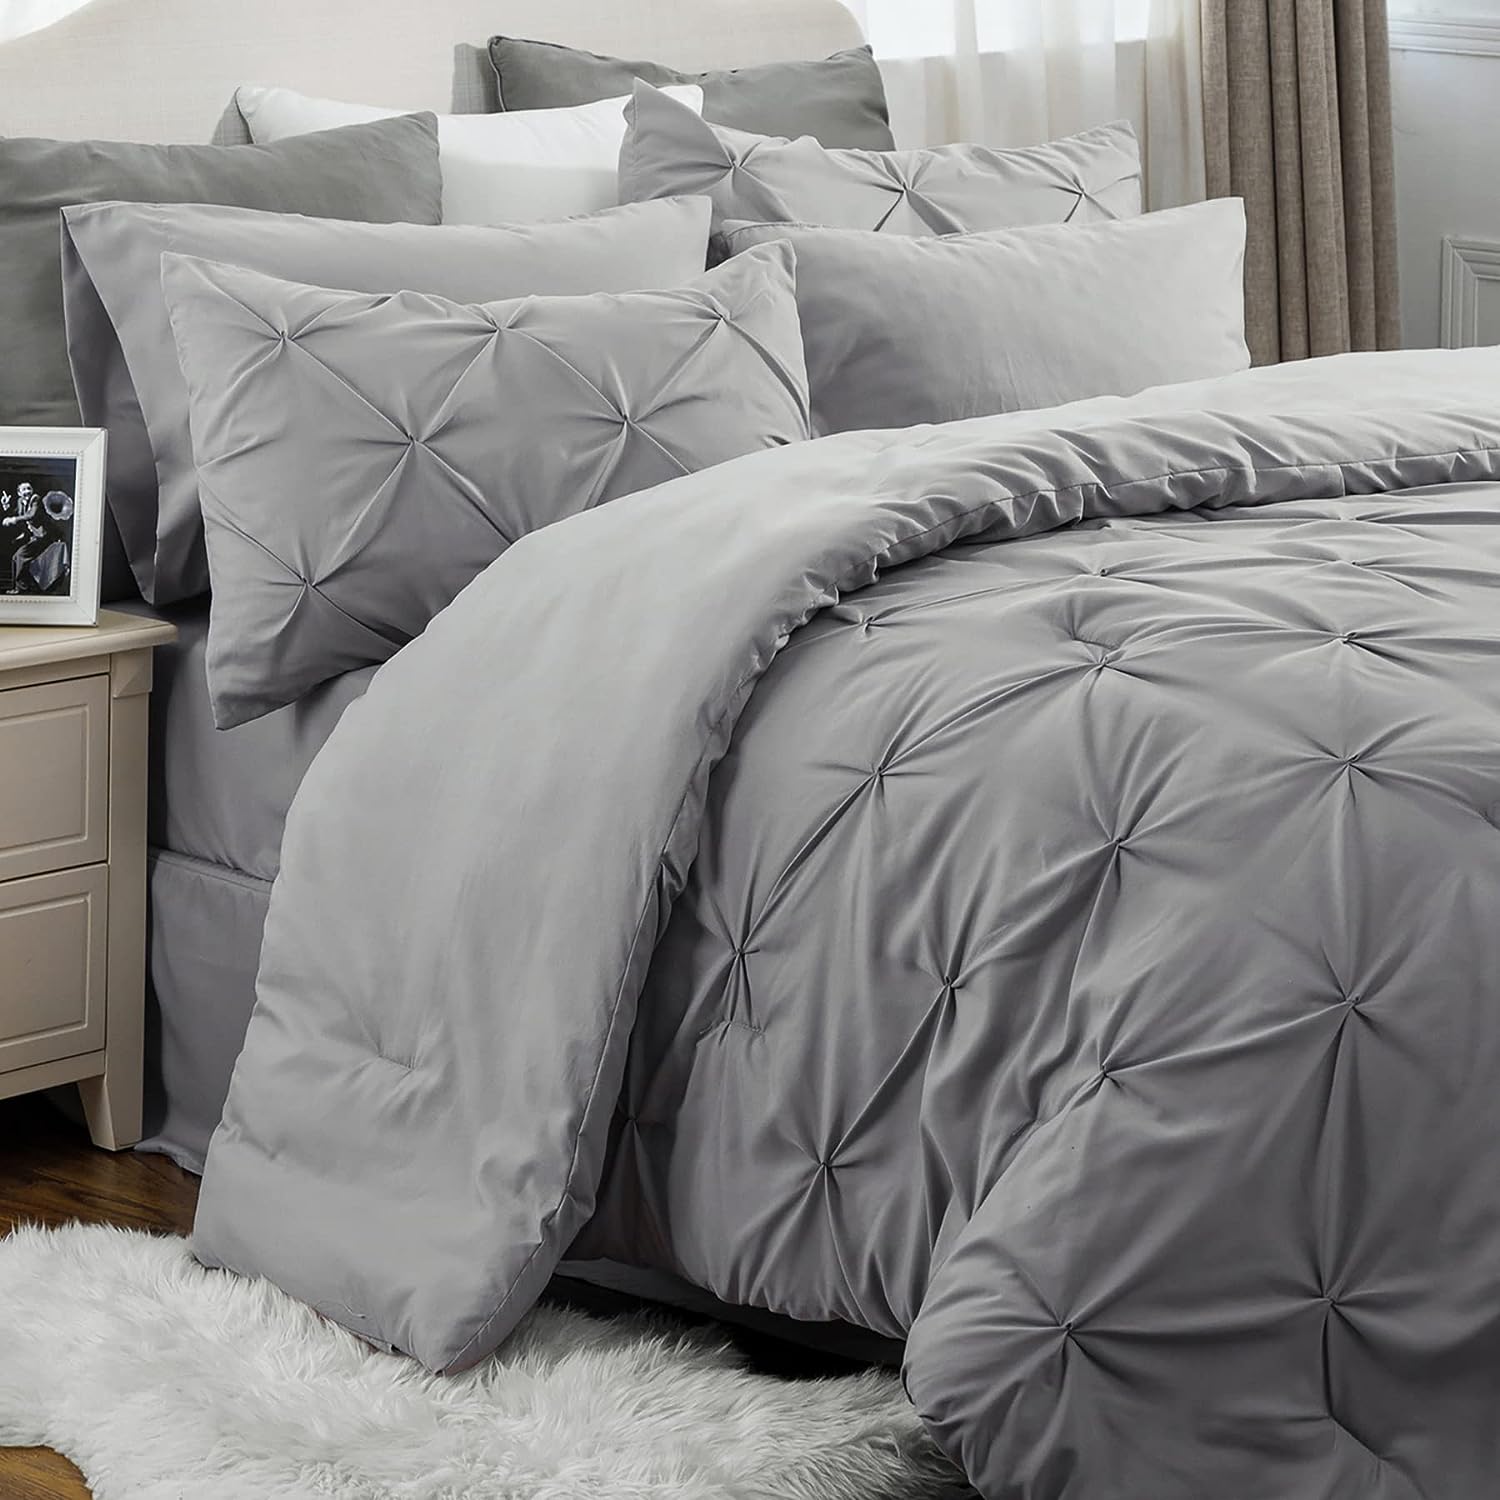 Bedsure Queen Comforter Set - 7 Pieces Reversible Comforters Queen Size Bed  Set Bed in a Bag with Comforter, Sheets, Pillowcases & Shams, Grey Bedding